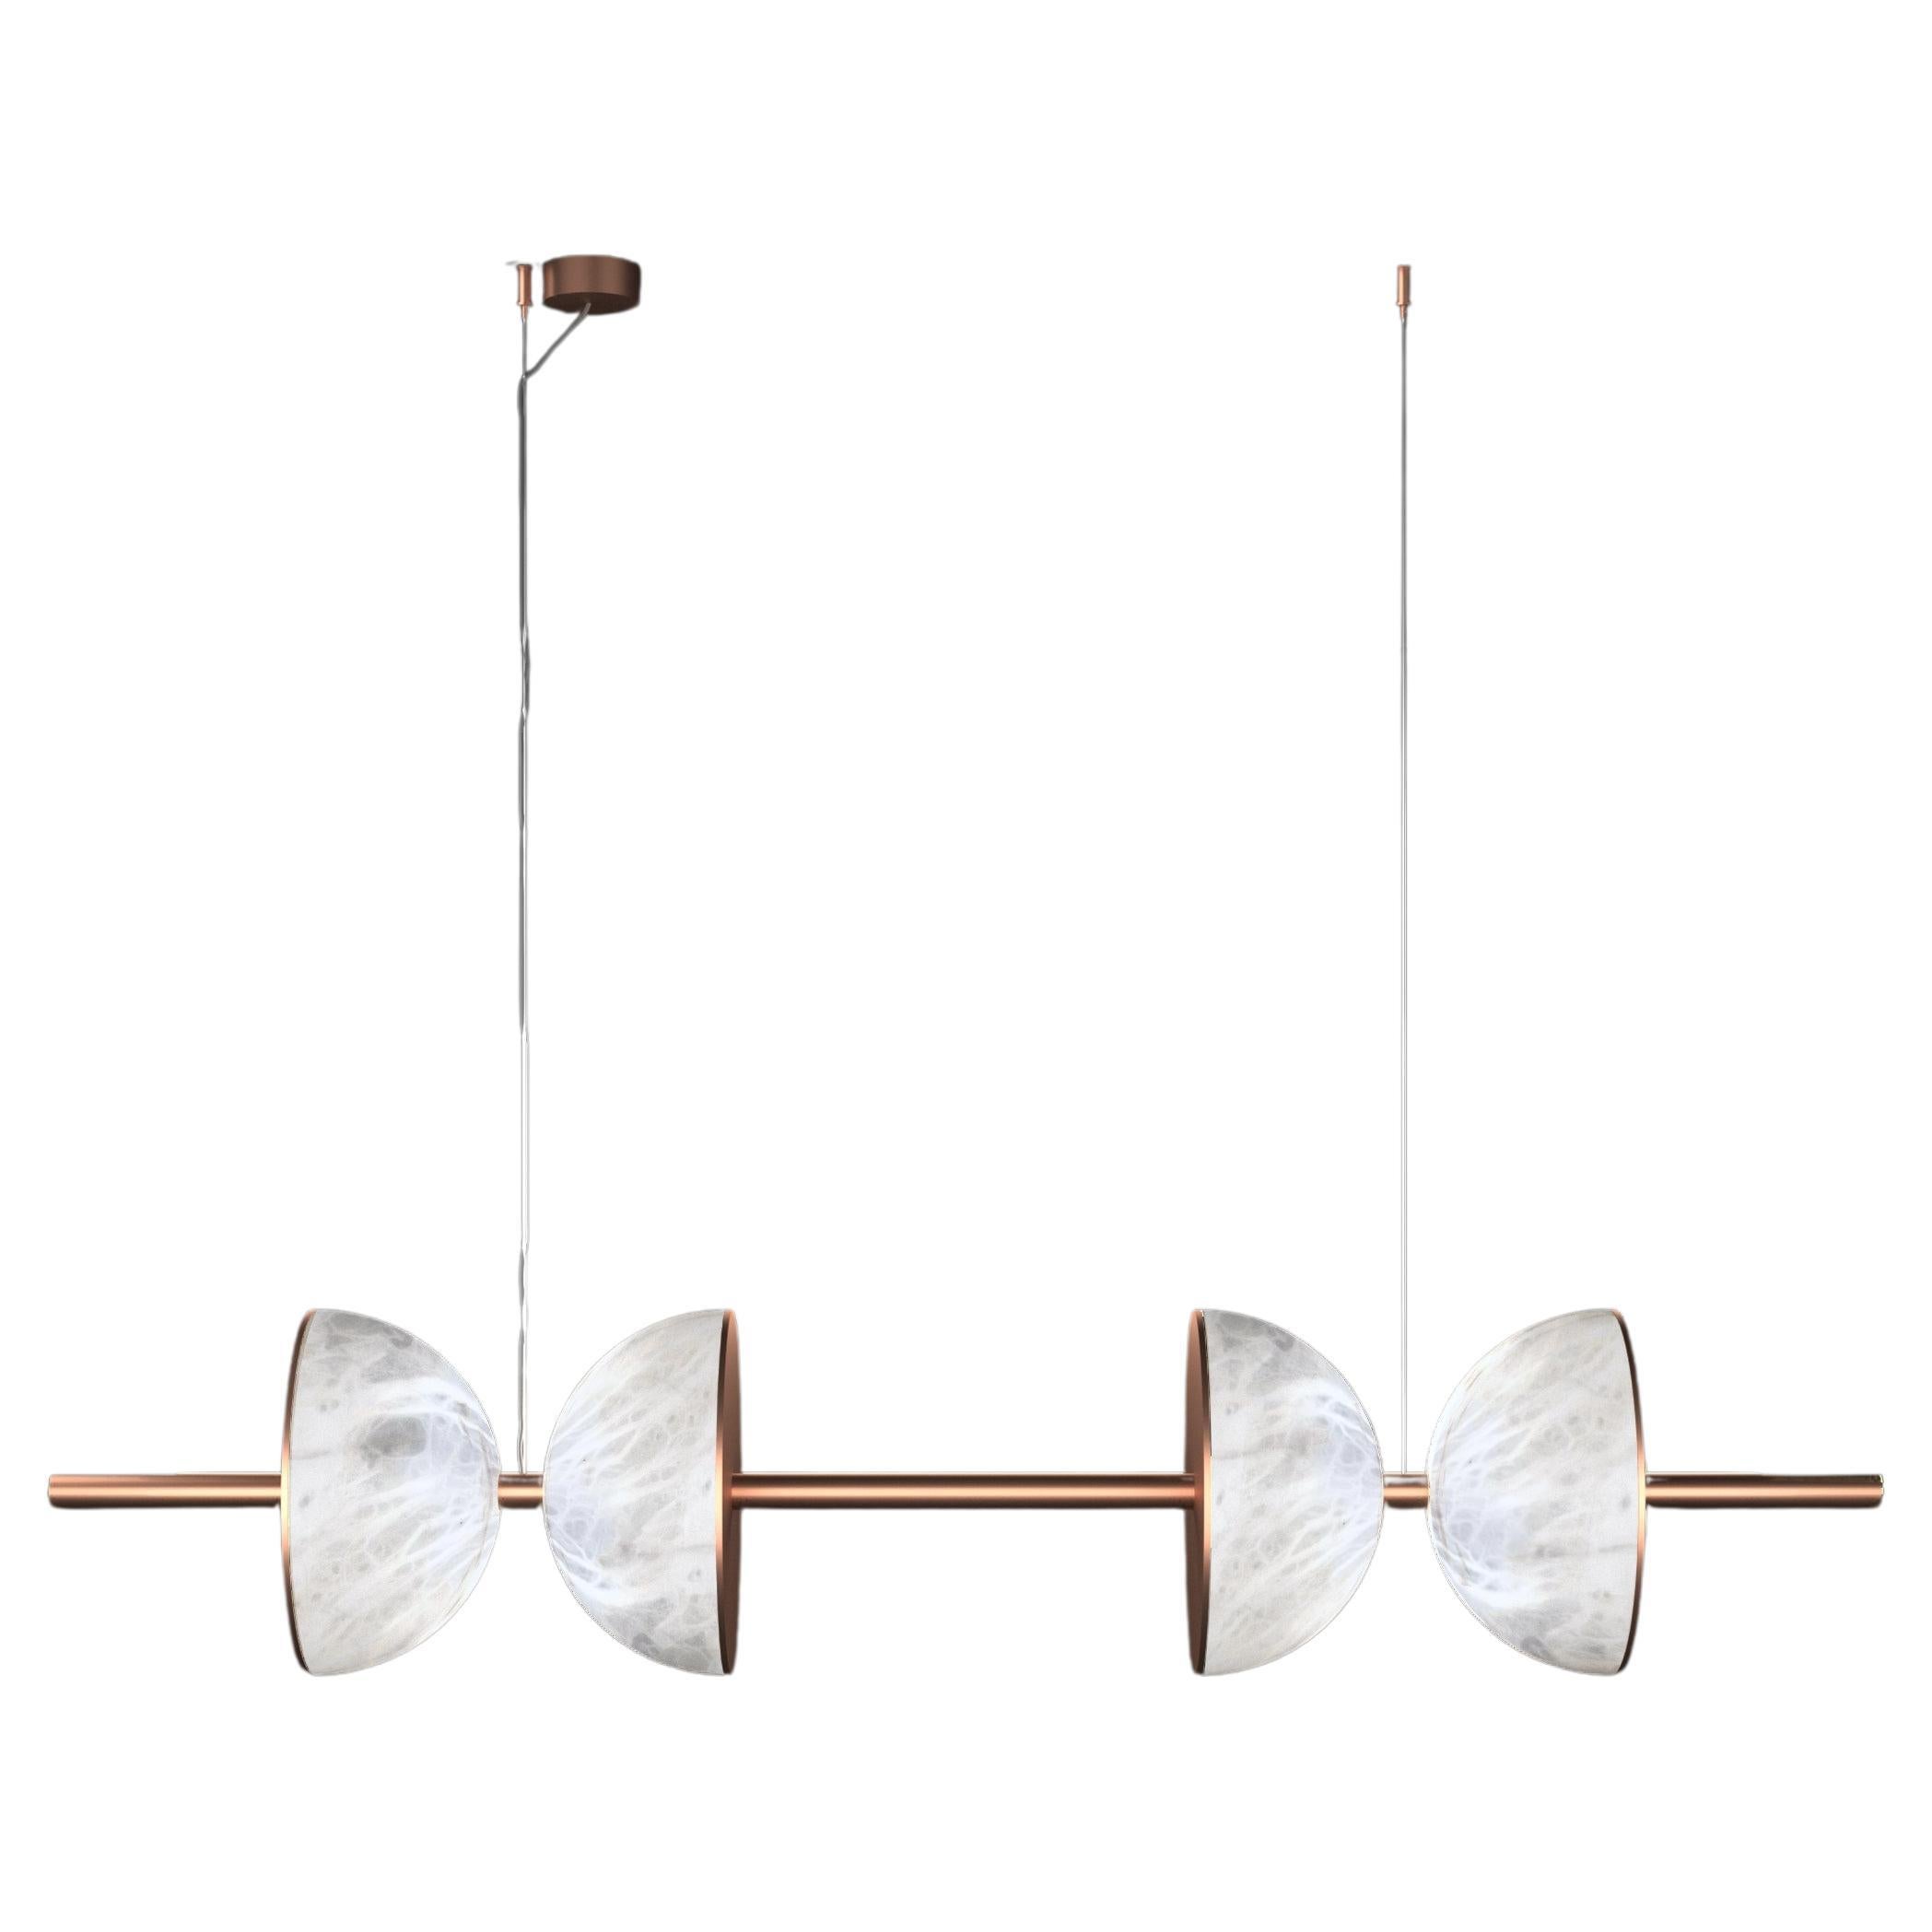 Ermes Copper And Alabaster Pendant Light 2 by Alabastro Italiano